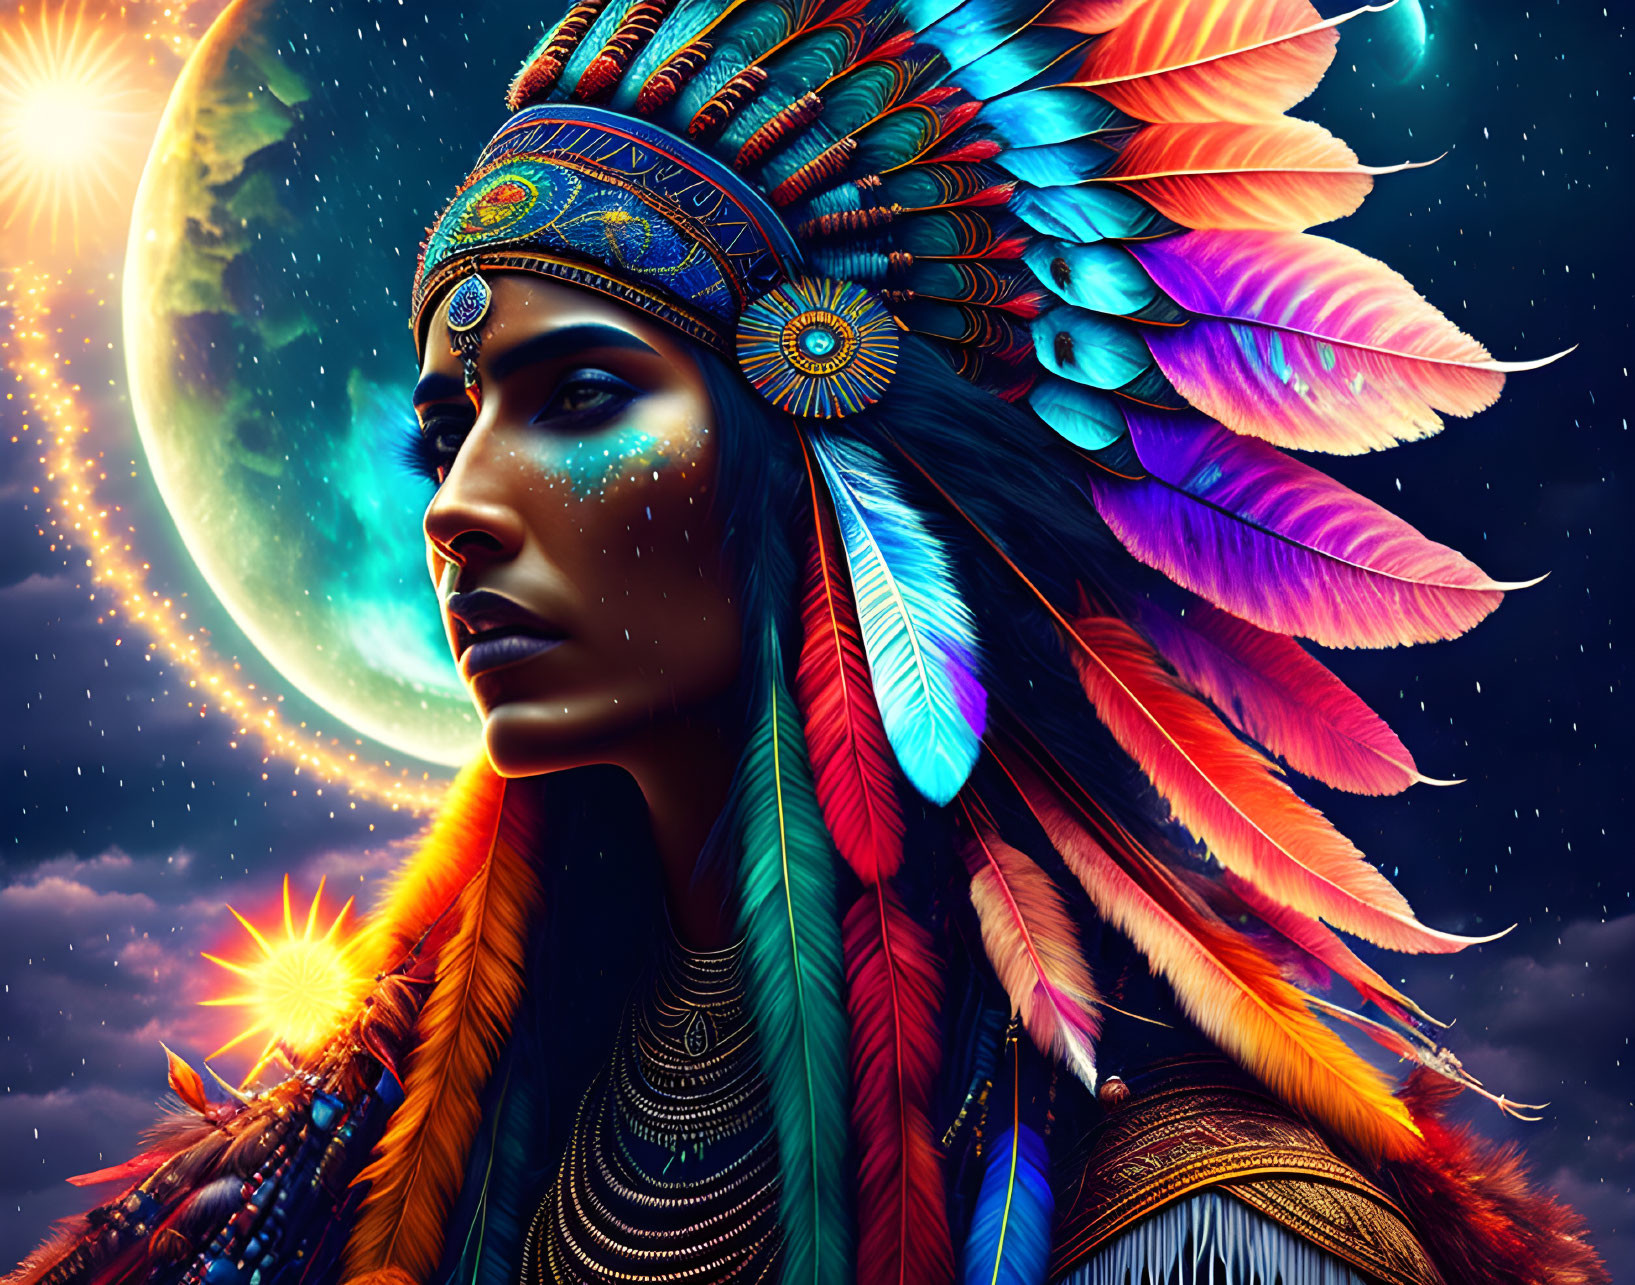 Shaman woman coming from the stars